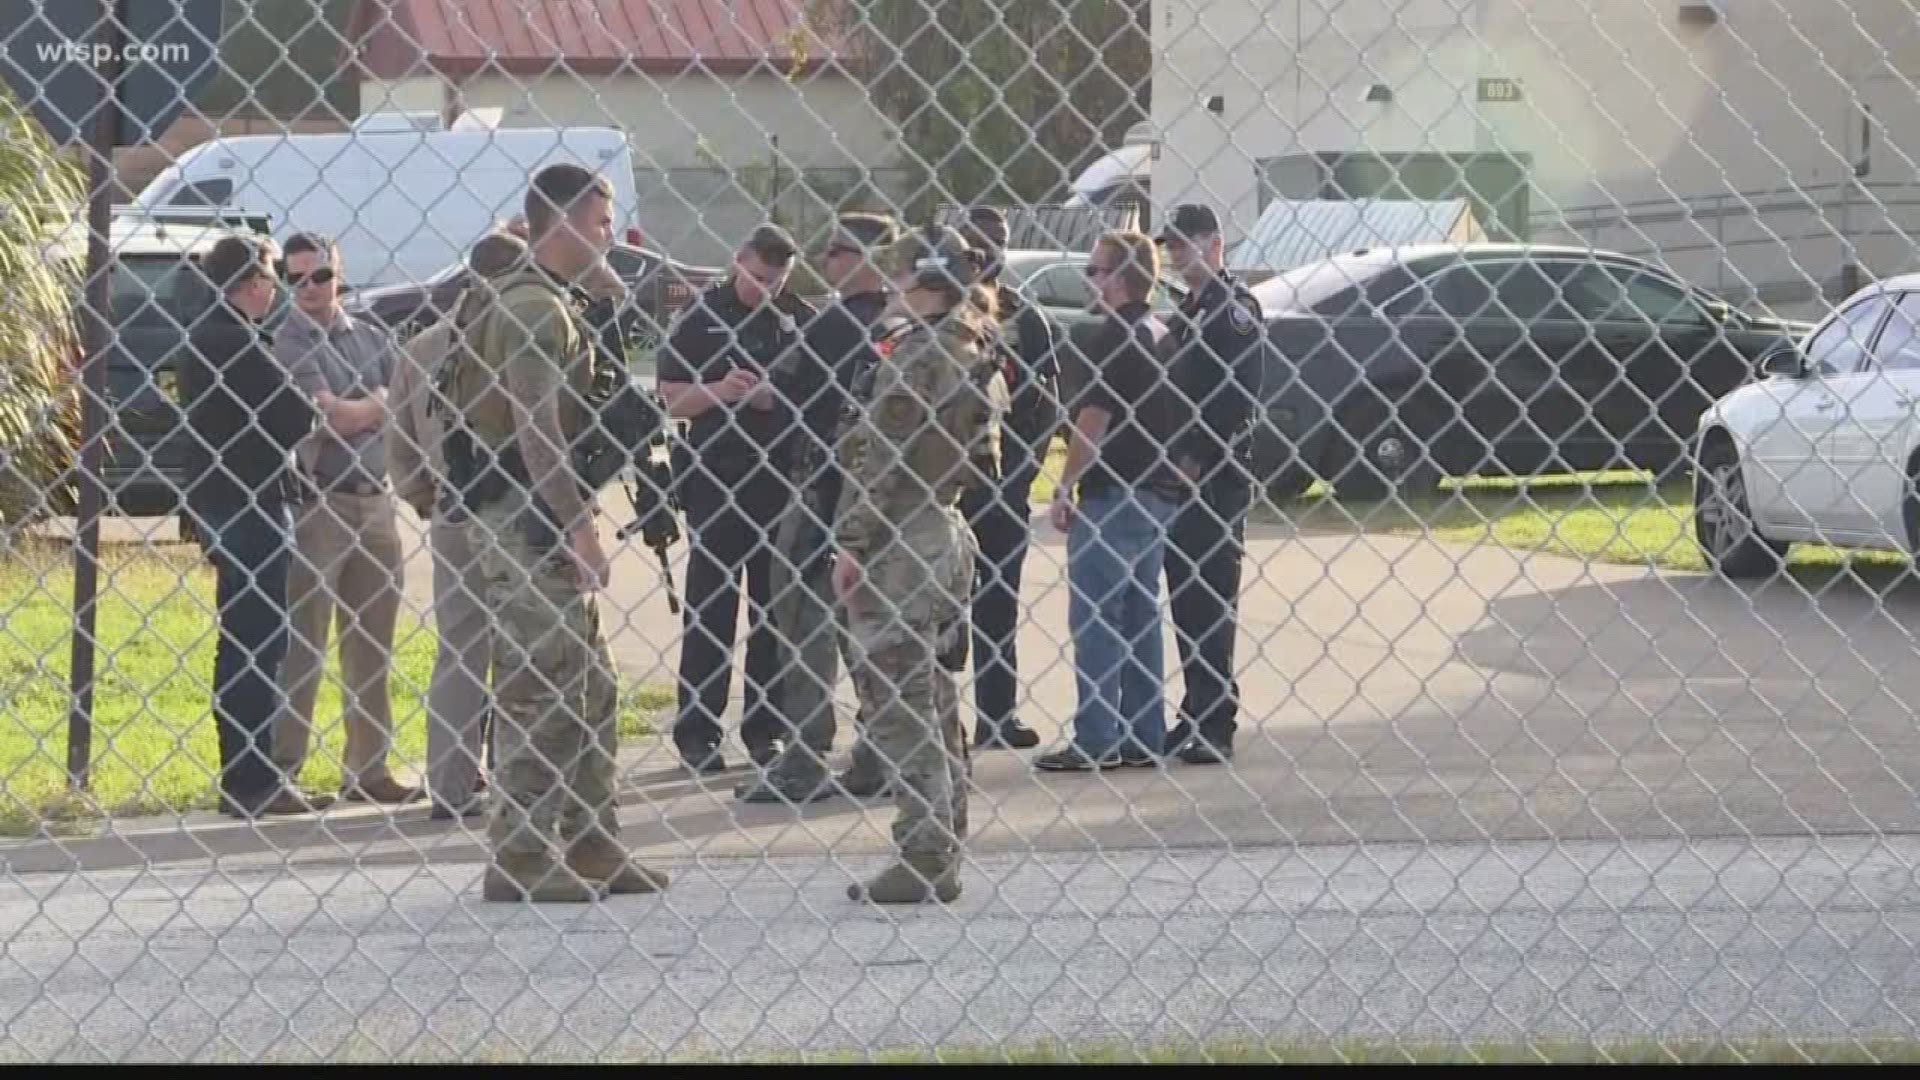 Authorities say a domestic situation in St. Petersburg ultimately led to a lockdown at the military installation in Tampa.